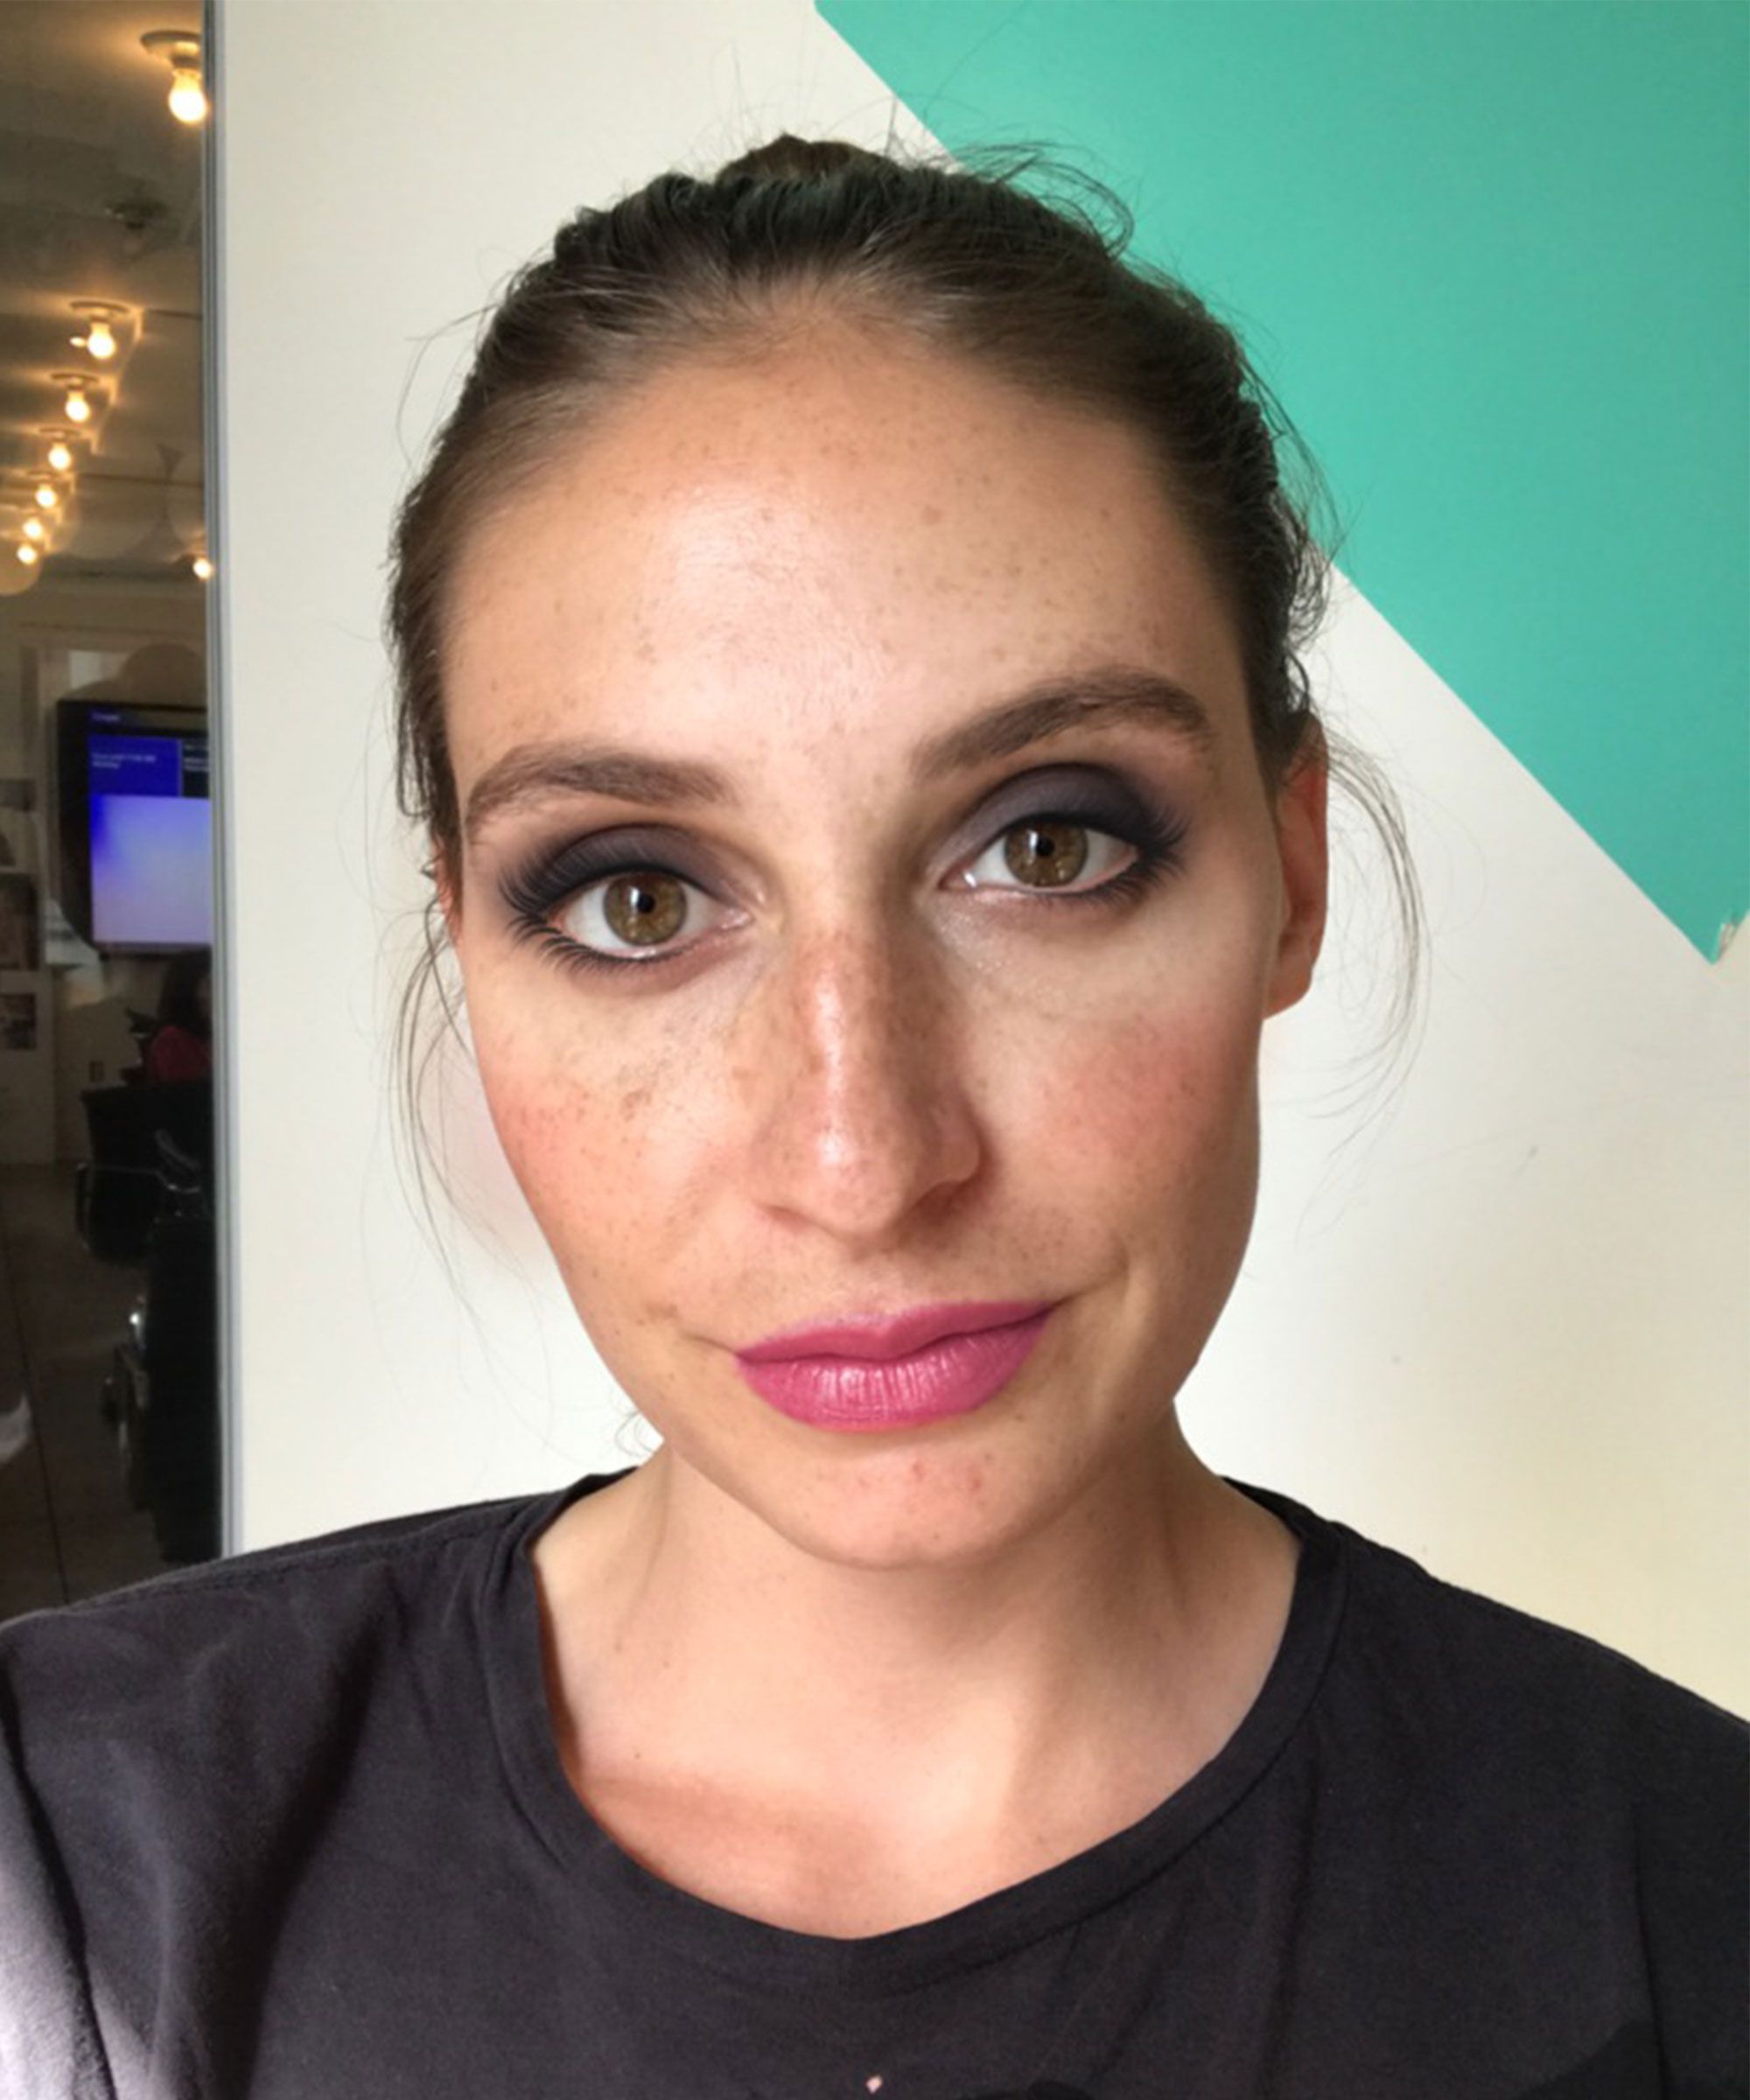 we tested top glam try on makeup apps & things got weird